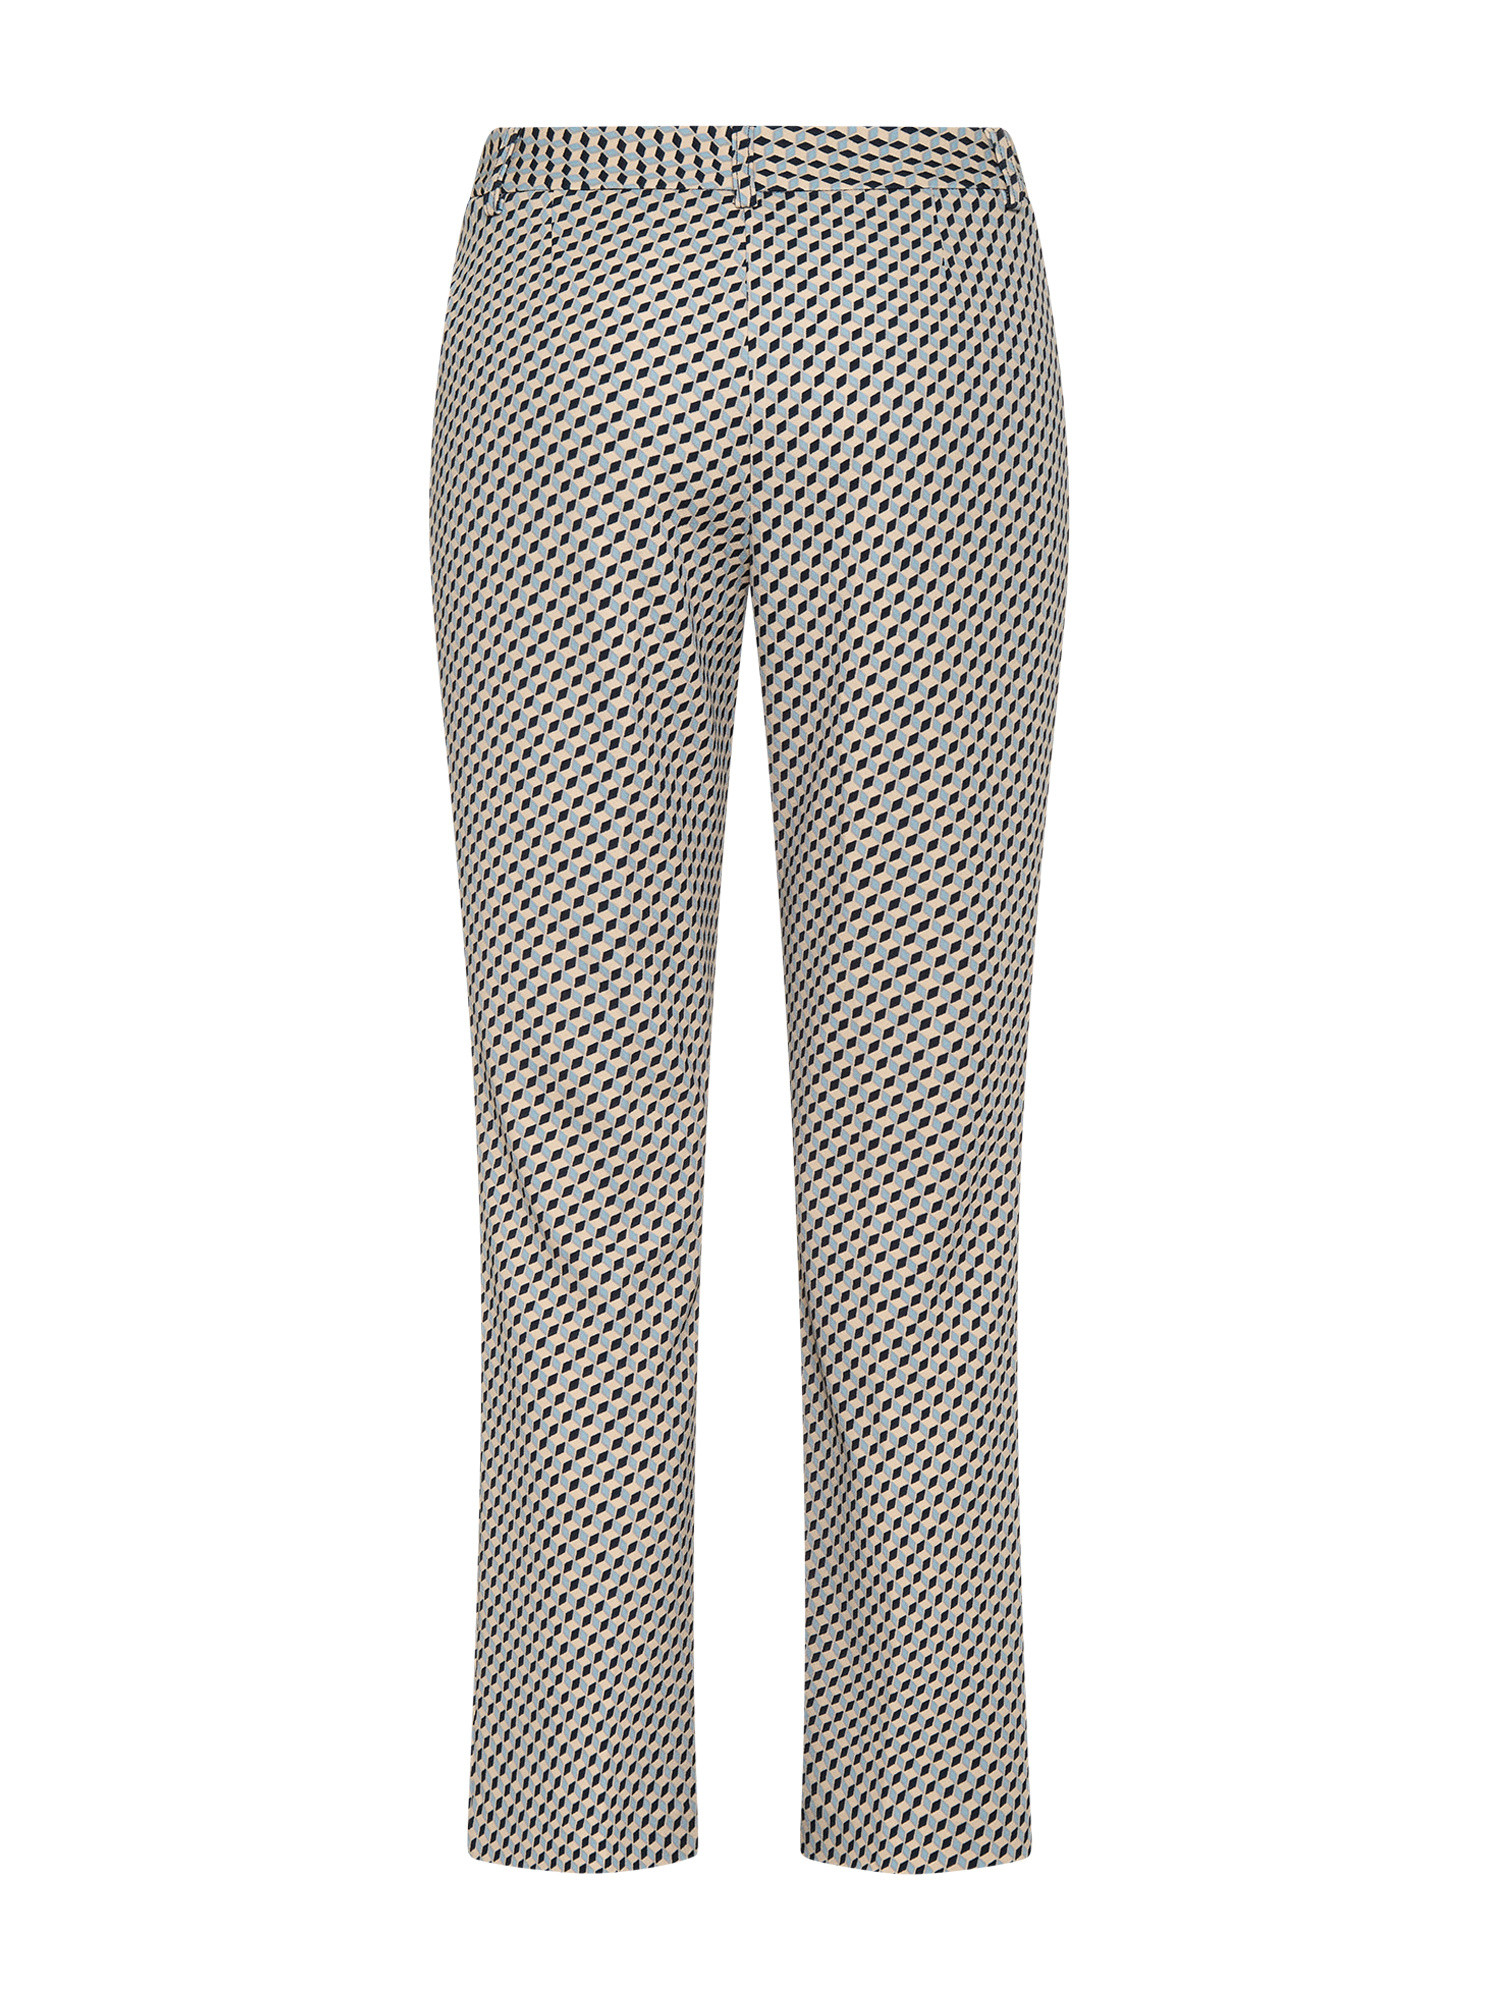 Koan - Flare trousers in printed fabric, Light Blue, large image number 1